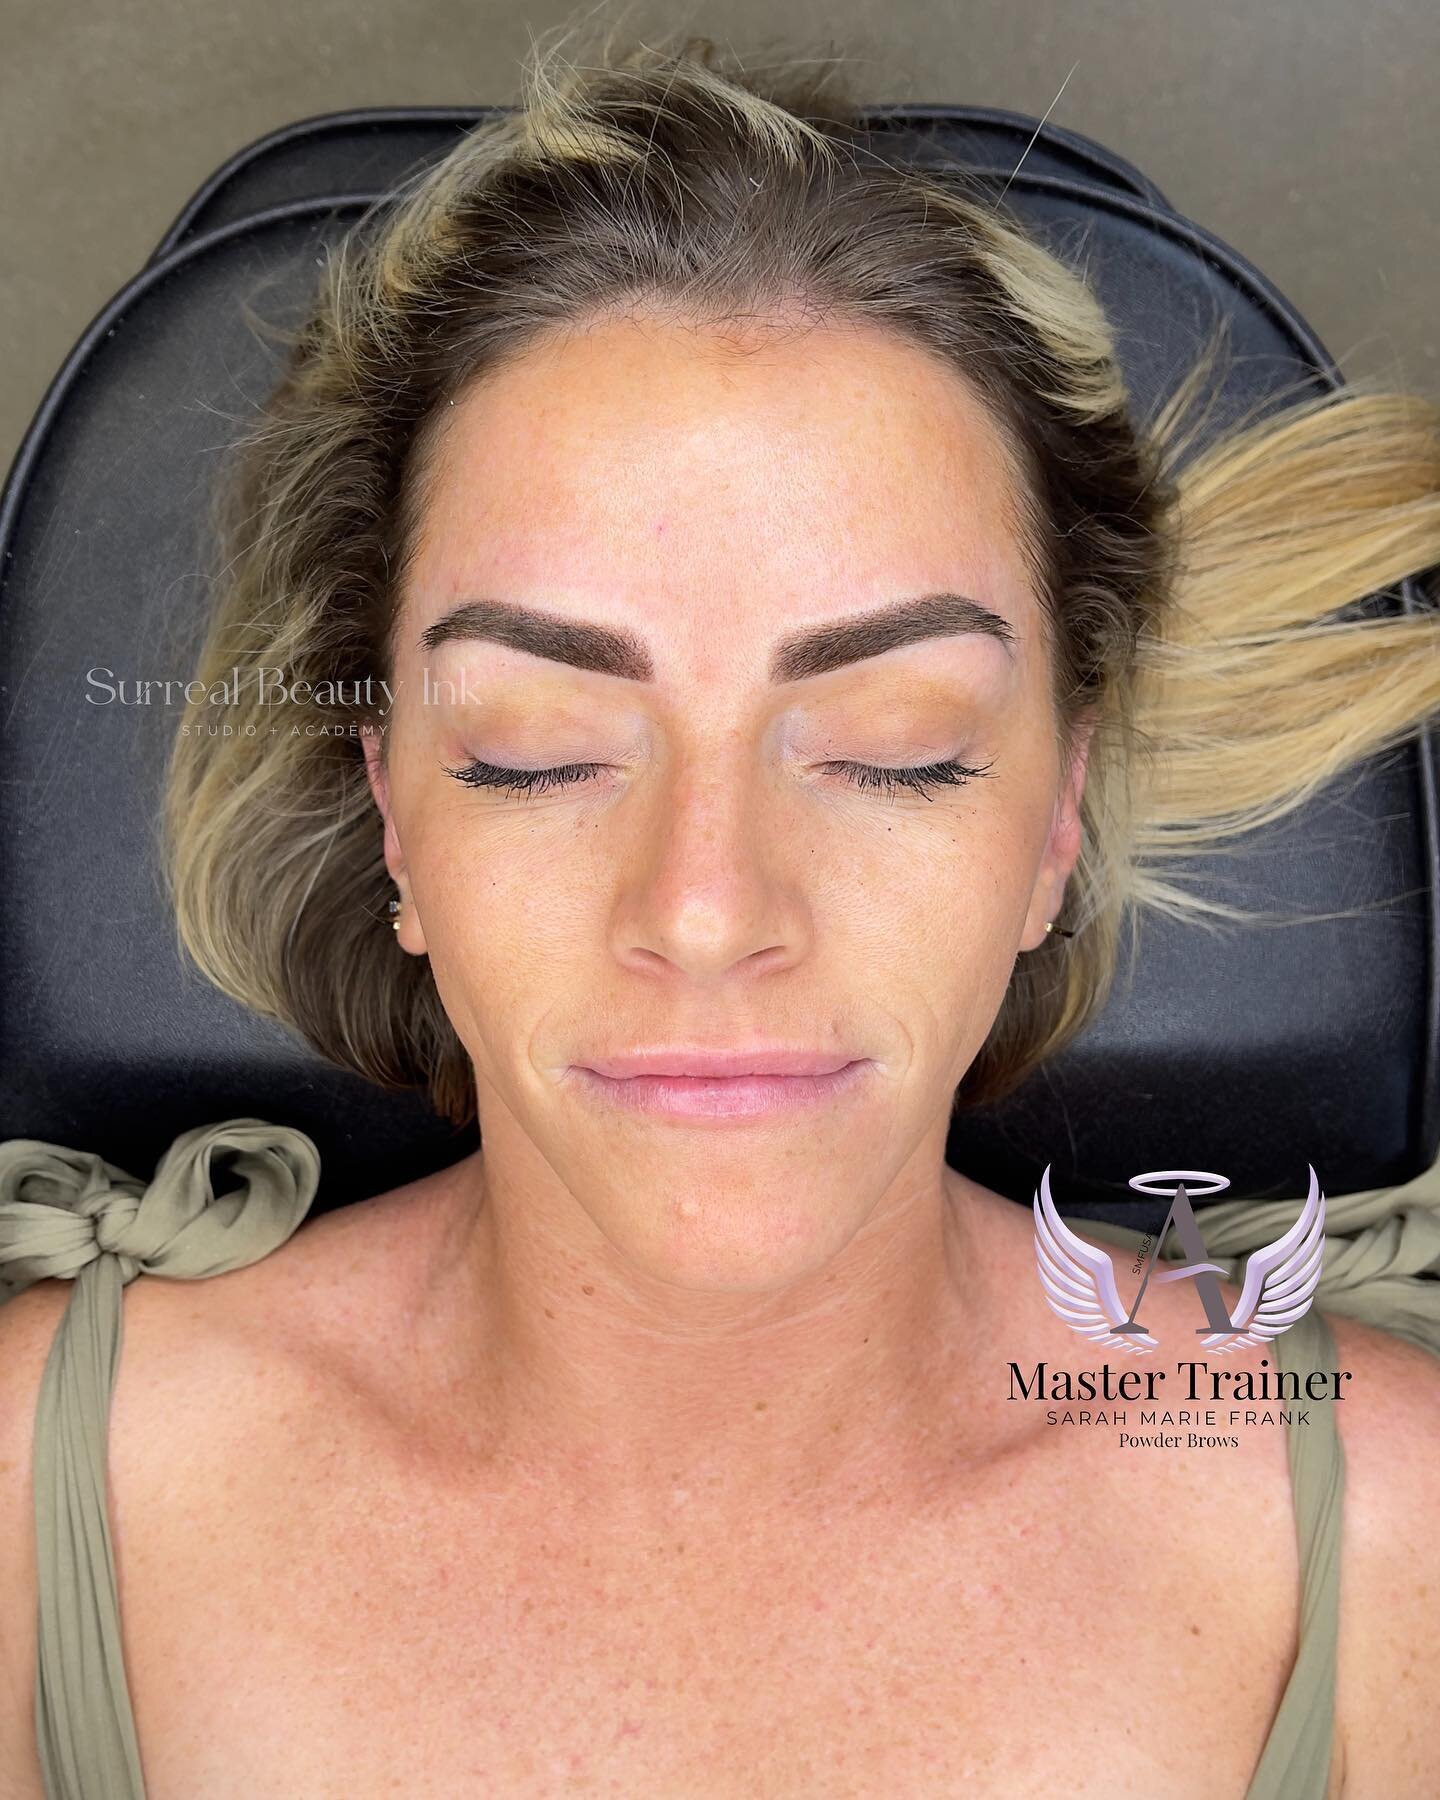 Powder brows for my dear friend 😌🩷

She started with me at the beginning of my pmu career with microblading. Today, I was finally able to upgrade her to a beautiful powder brow! 

Thank you @briwatkinsphoto for trusting me since the beginning to ta